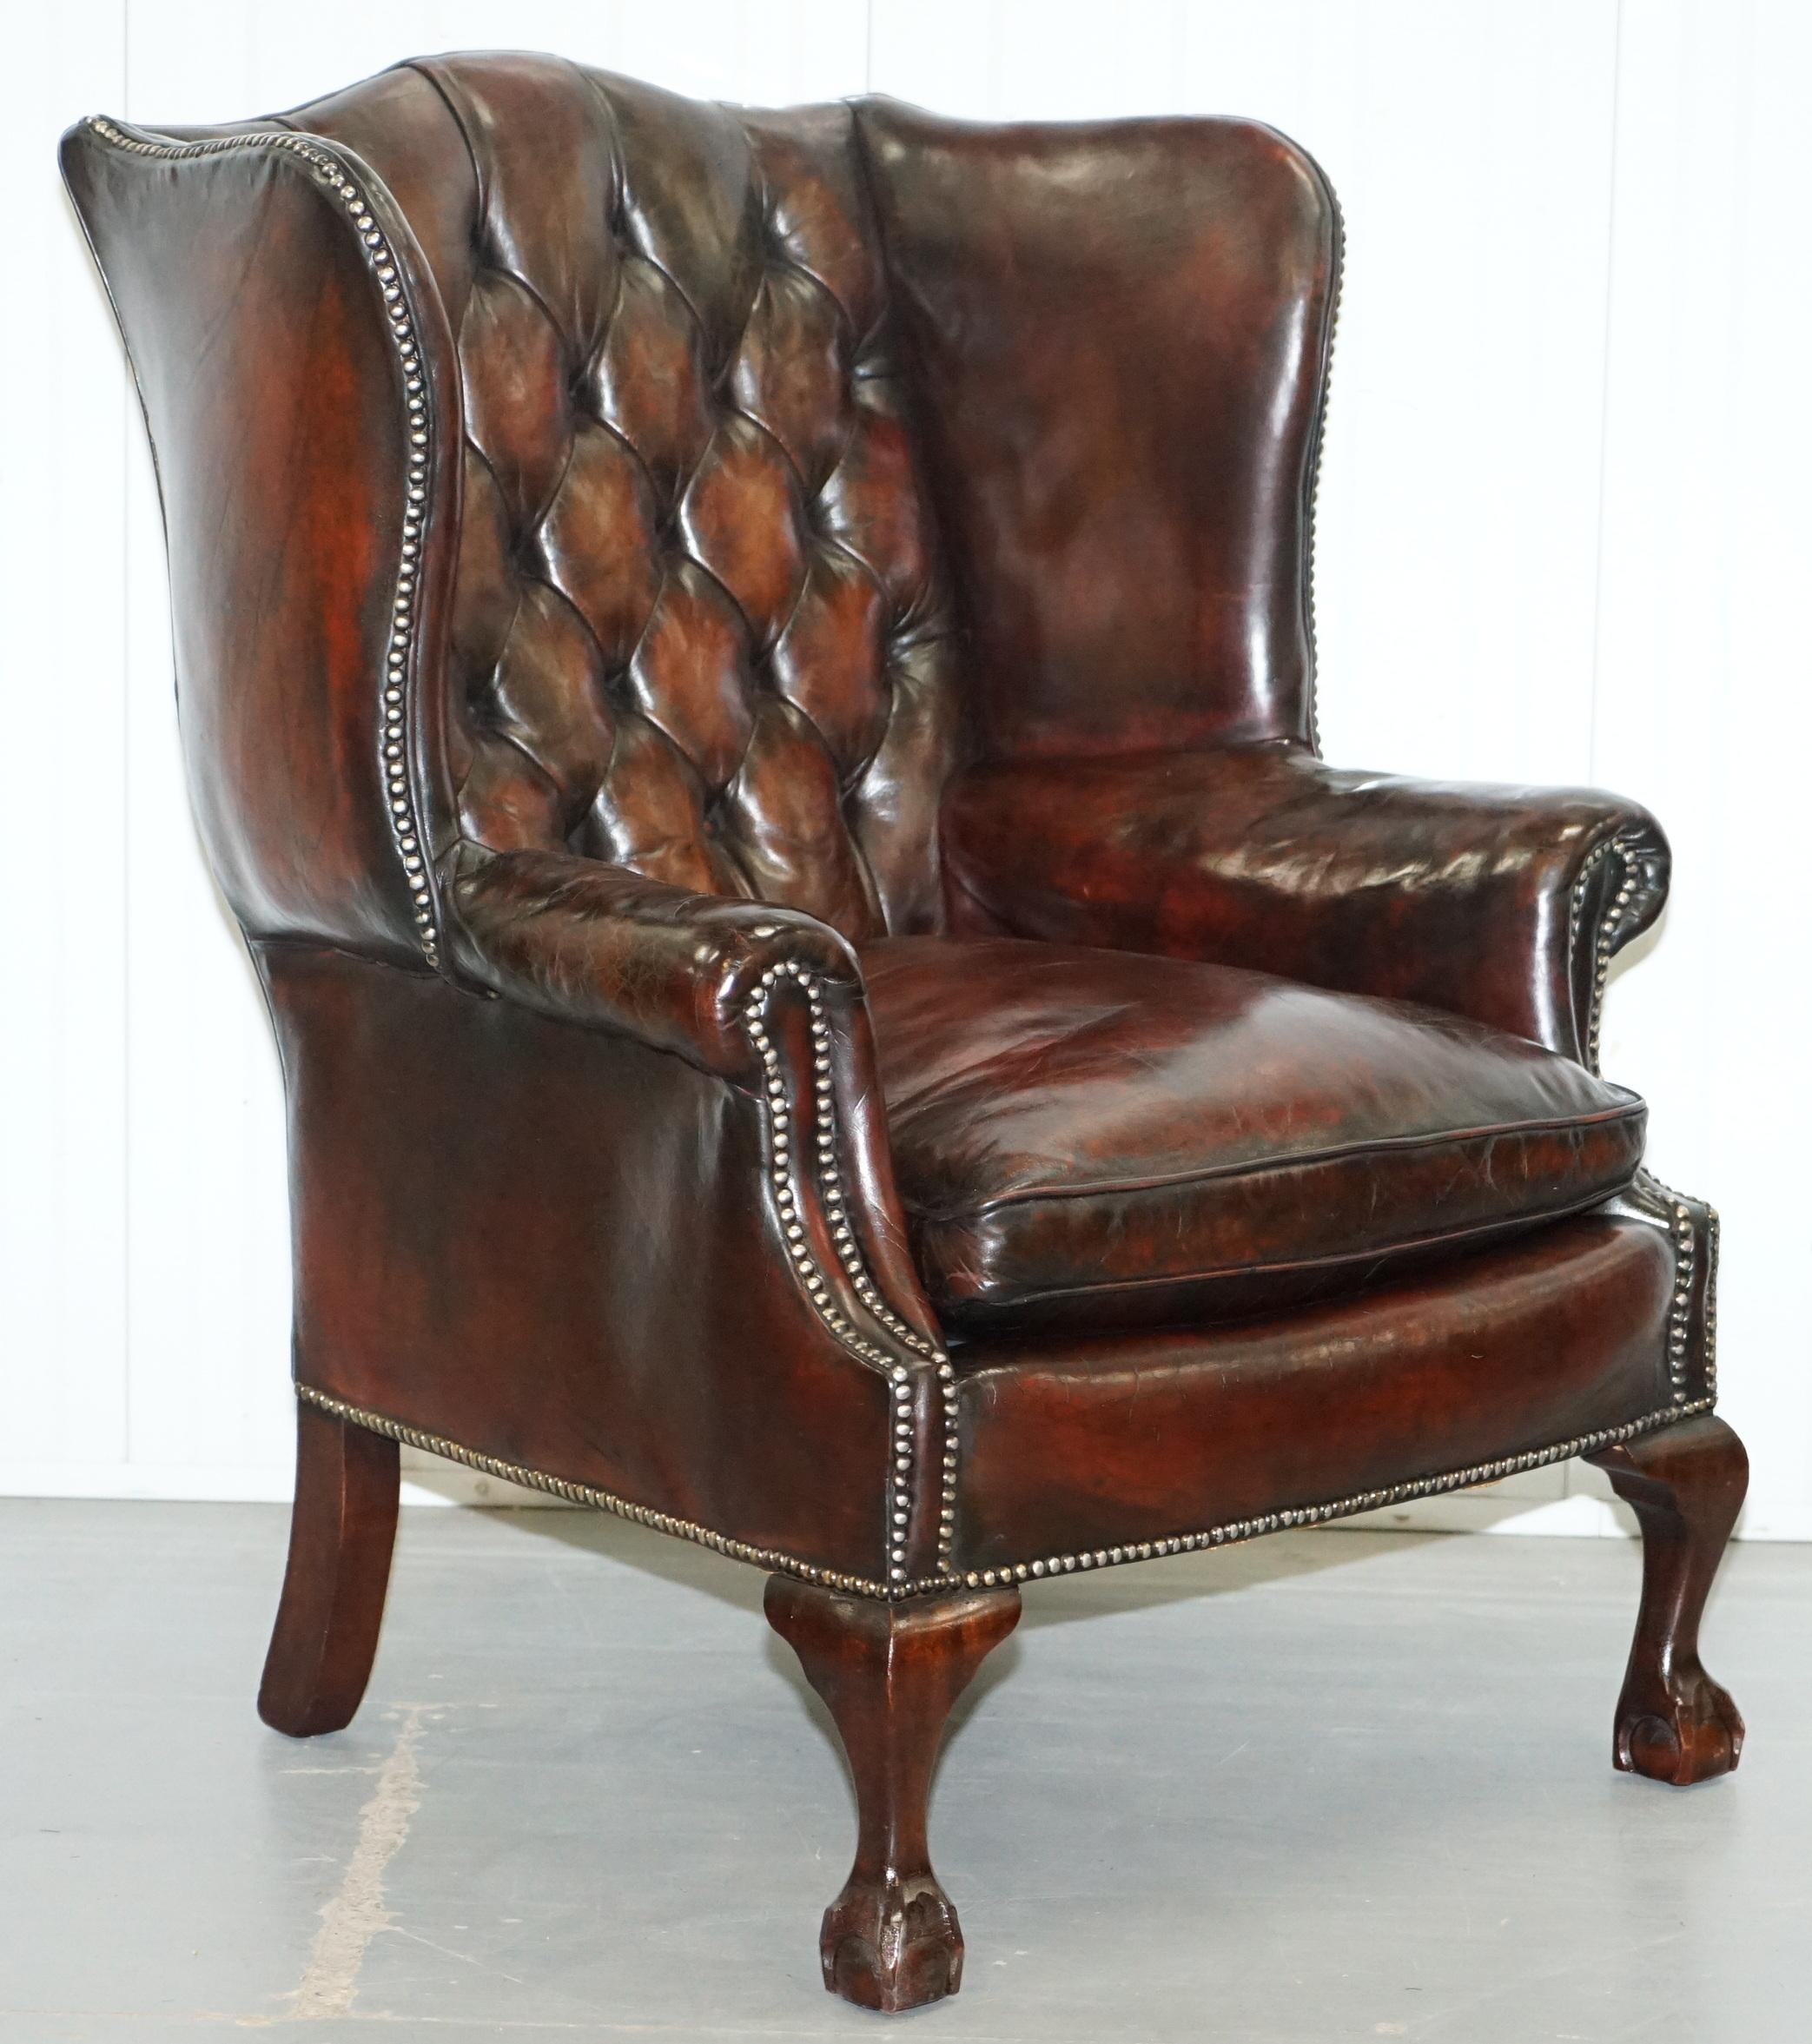 We are delighted to offer for sale this lovely mid-century restored Claw & Ball feet Chesterfield wingback armchair and footstool in brown leather upholstery

Please note the delivery fee listed is just a guide.

A lovely pair, full of vintage charm